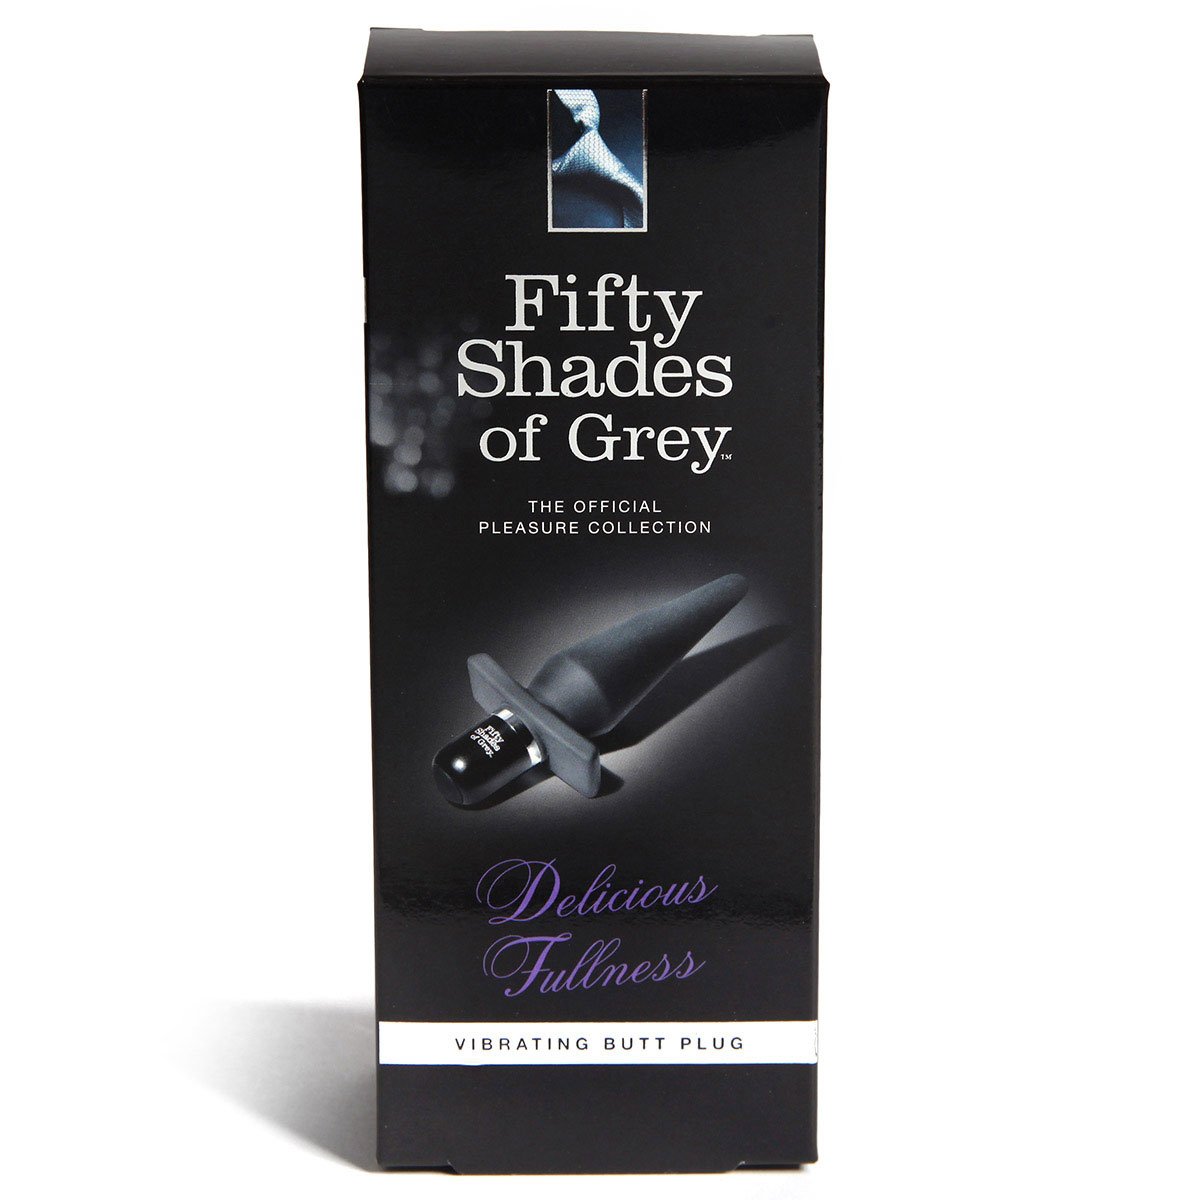 Fifty Shades Delicious Fullness Vibrating Butt Plug - Buy At Luxury Toy X - Free 3-Day Shipping